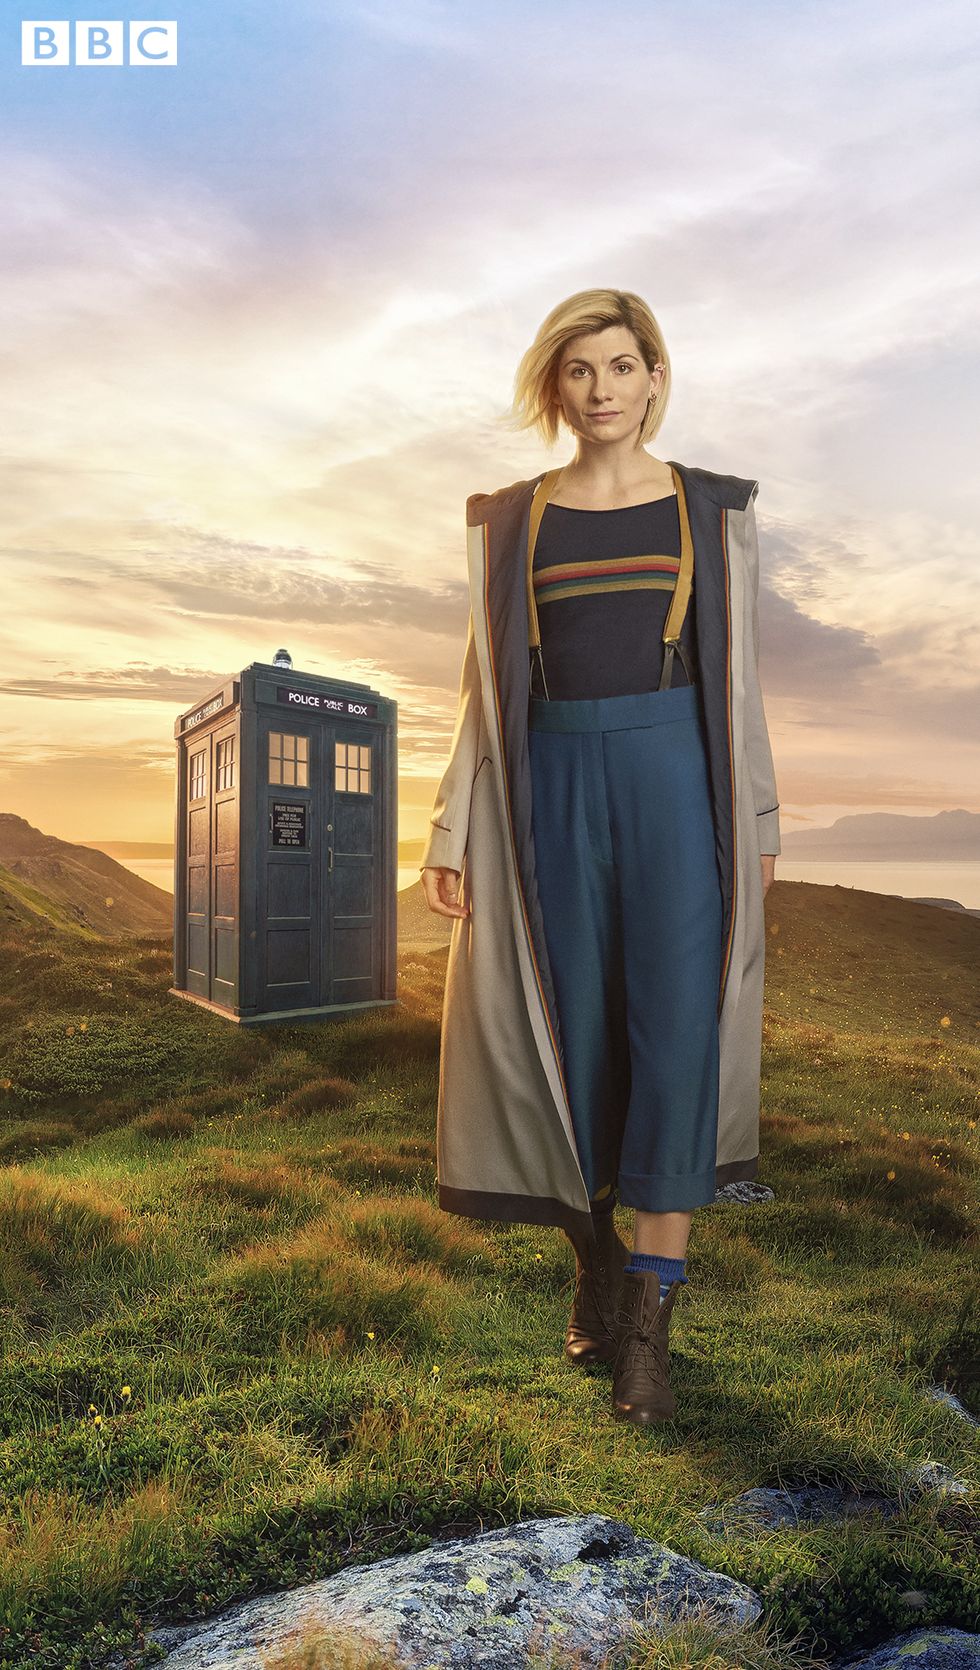 Jodie Whittaker in 'Doctor Who' series 11